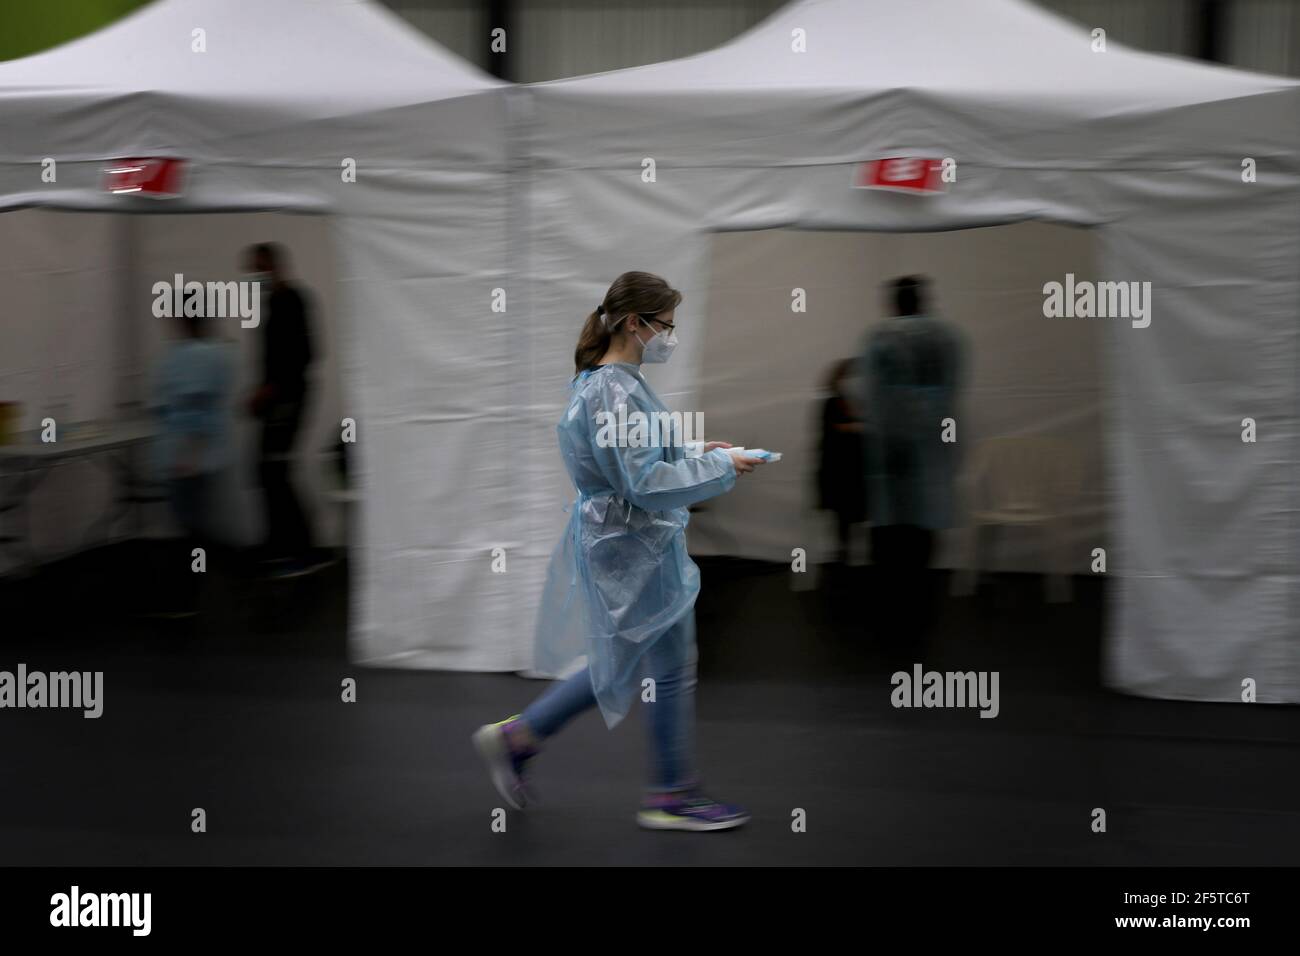 Lisbon, Portugal. 27th Mar, 2021. A medical worker holding a tray with the AstraZeneca COVID-19 vaccine walks by vaccination booths in Lisbon, Portugal, March 27, 2021. Portugal on Saturday started vaccinations of some 78,700 teachers and workers from pre-schools and schools of the first four years of the nine-year basic education. They are listed as one of the priority groups for the resumption of classes. Credit: Pedro Fiuza/Xinhua/Alamy Live News Stock Photo